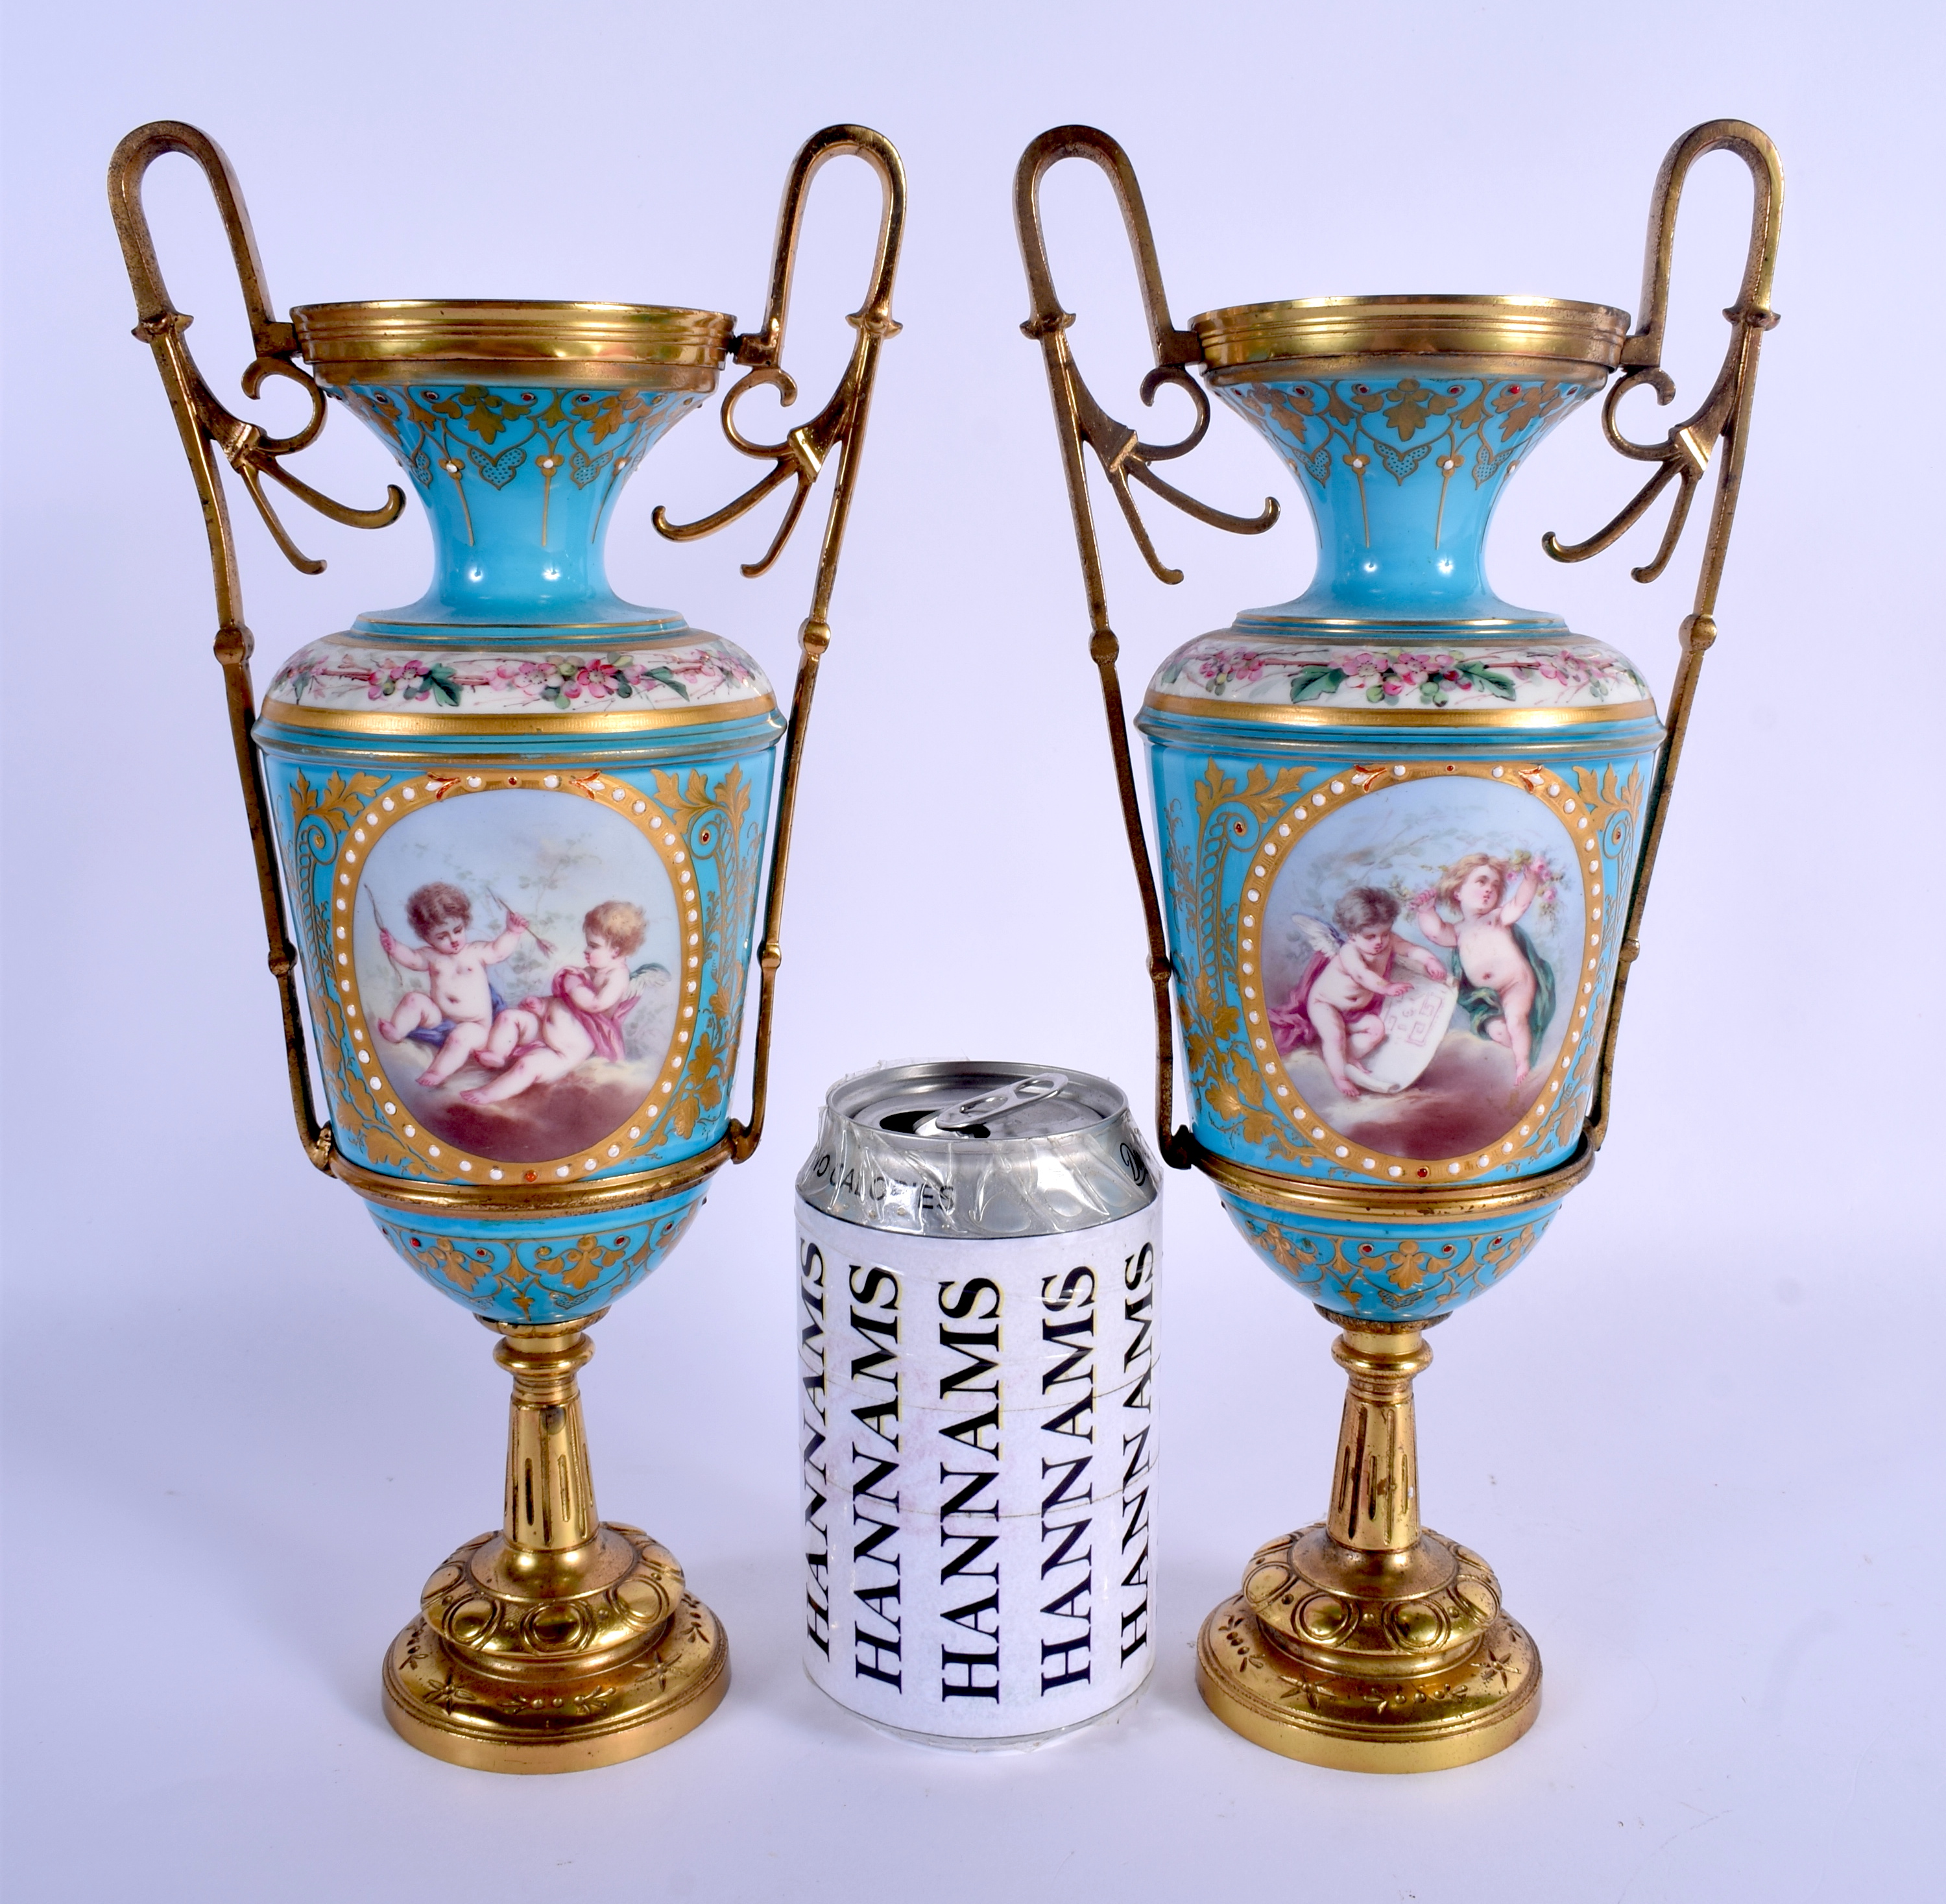 A PAIR OF 19TH CENTURY FRENCH SEVRES PORCELAIN VASES painted and jewelled with putti in various purs